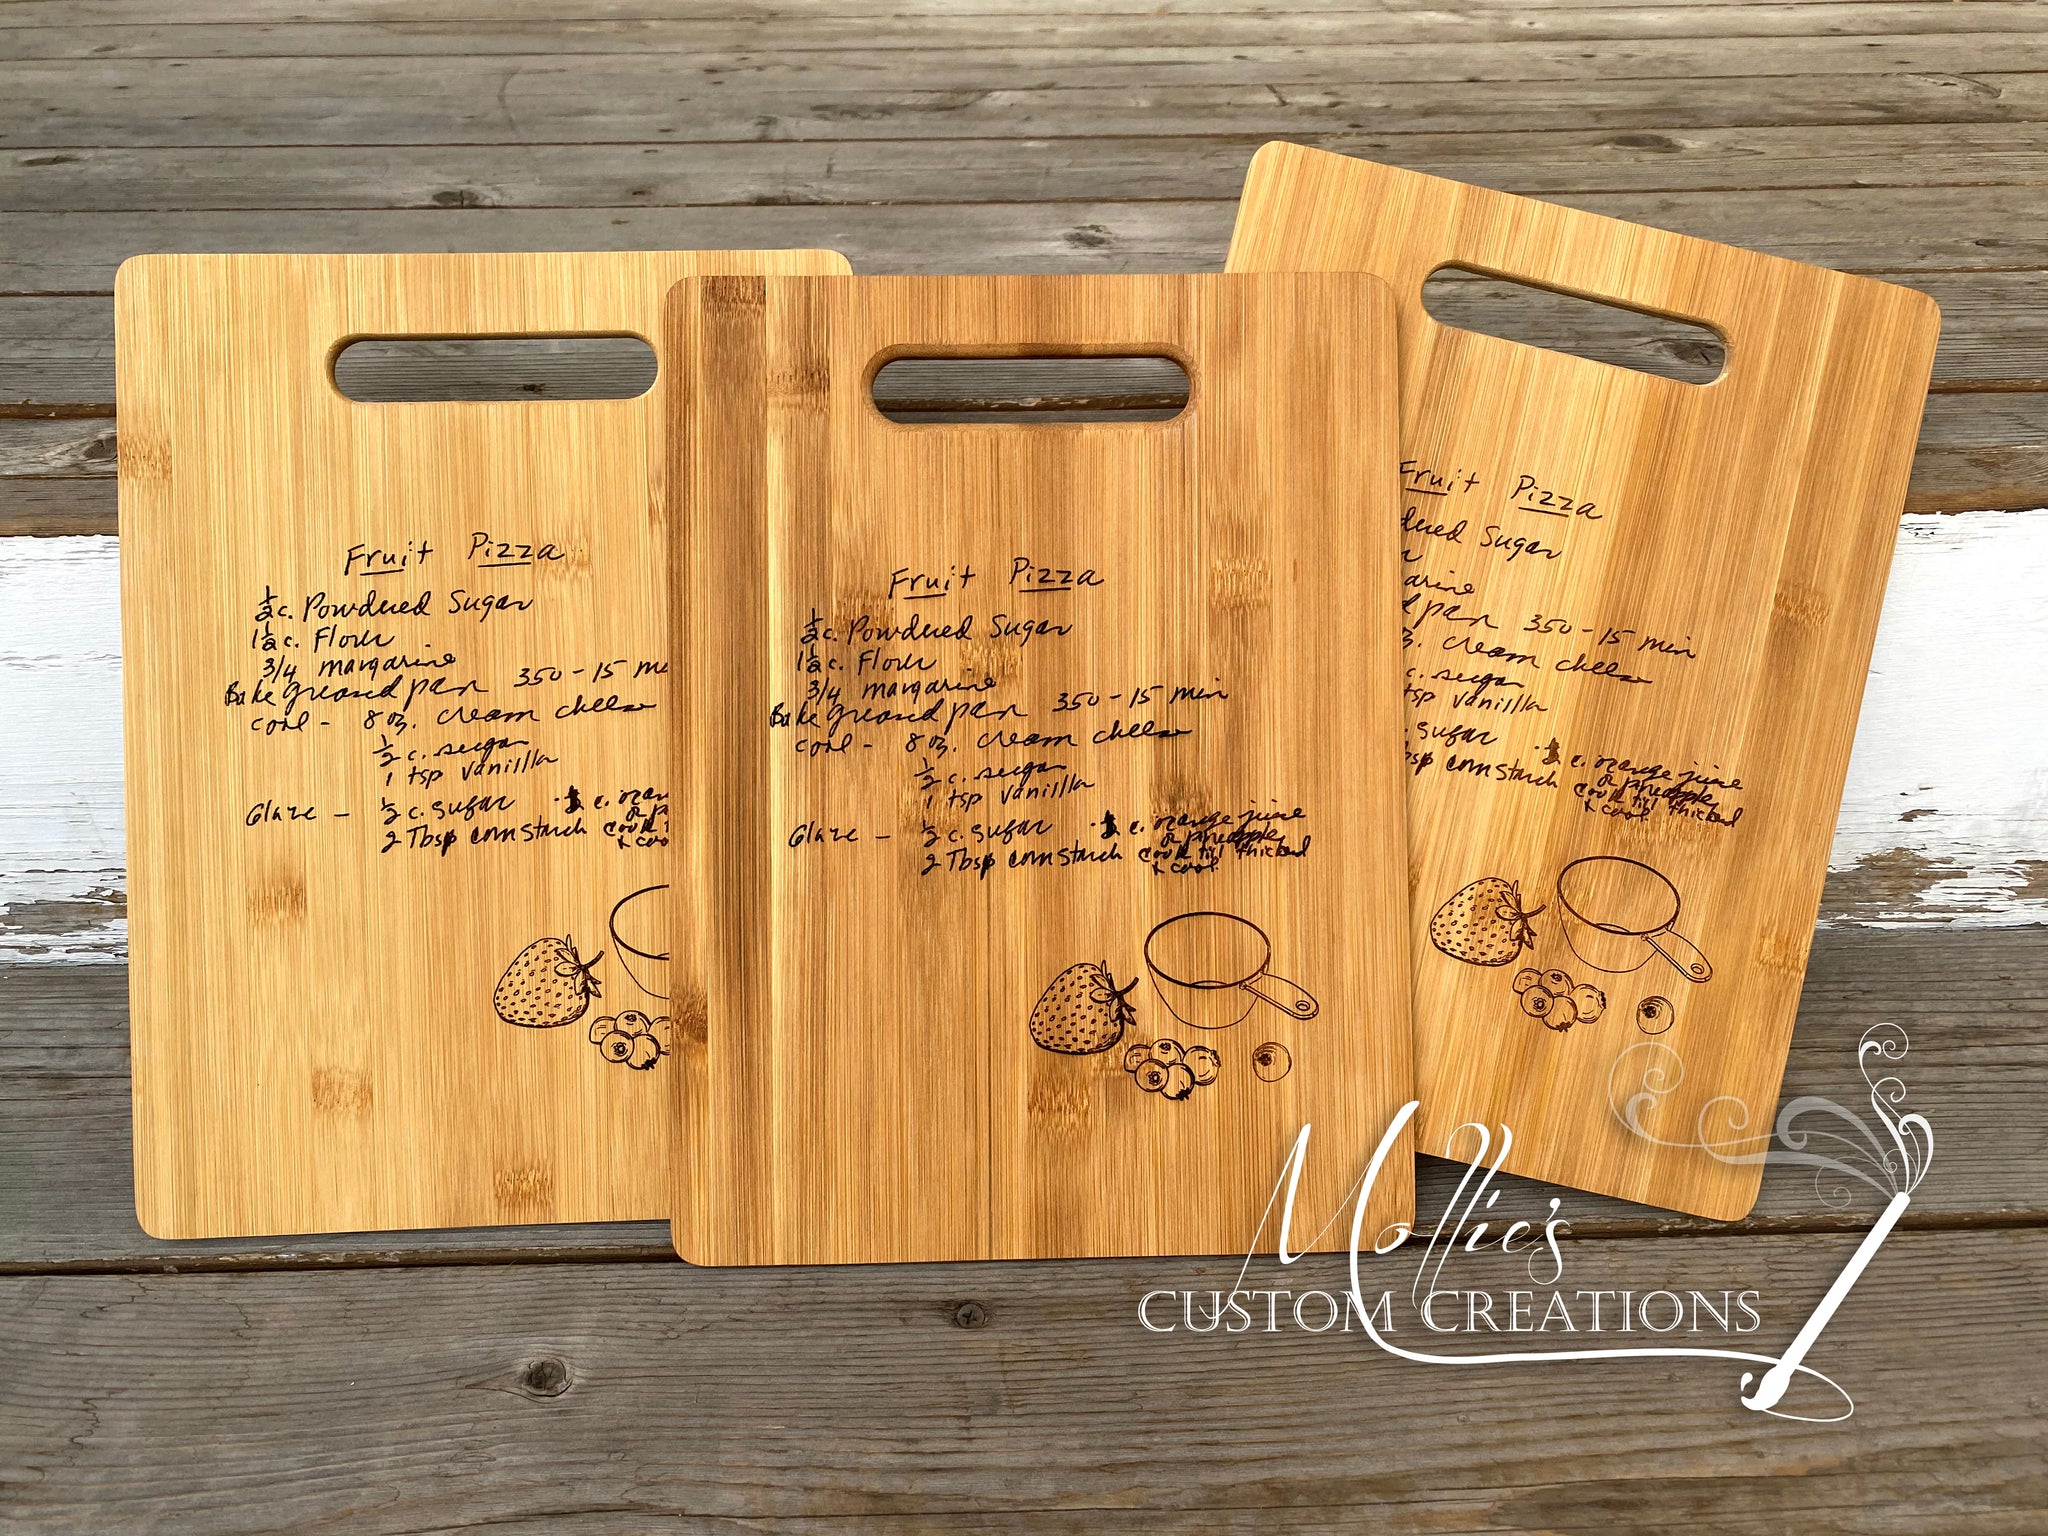 Bamboo Cookbook Stand & Cutting Board for Engraving